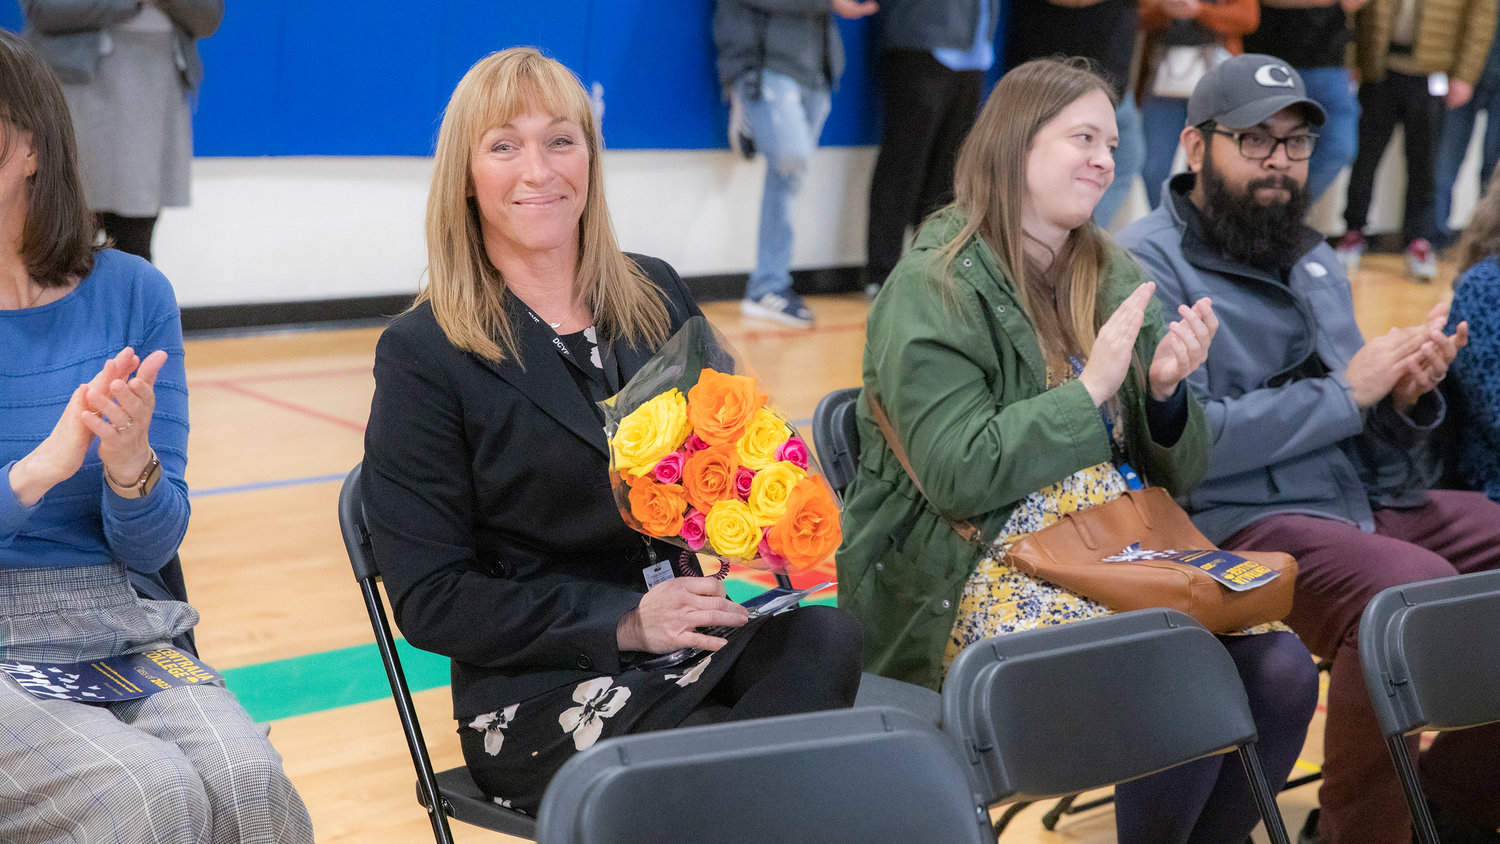 Green Hill Superintendent Jennifer Redman smiles for a photo after being honored with flowers during a graduation ceremony for Centralia College graduates on Wednesday in Chehalis.